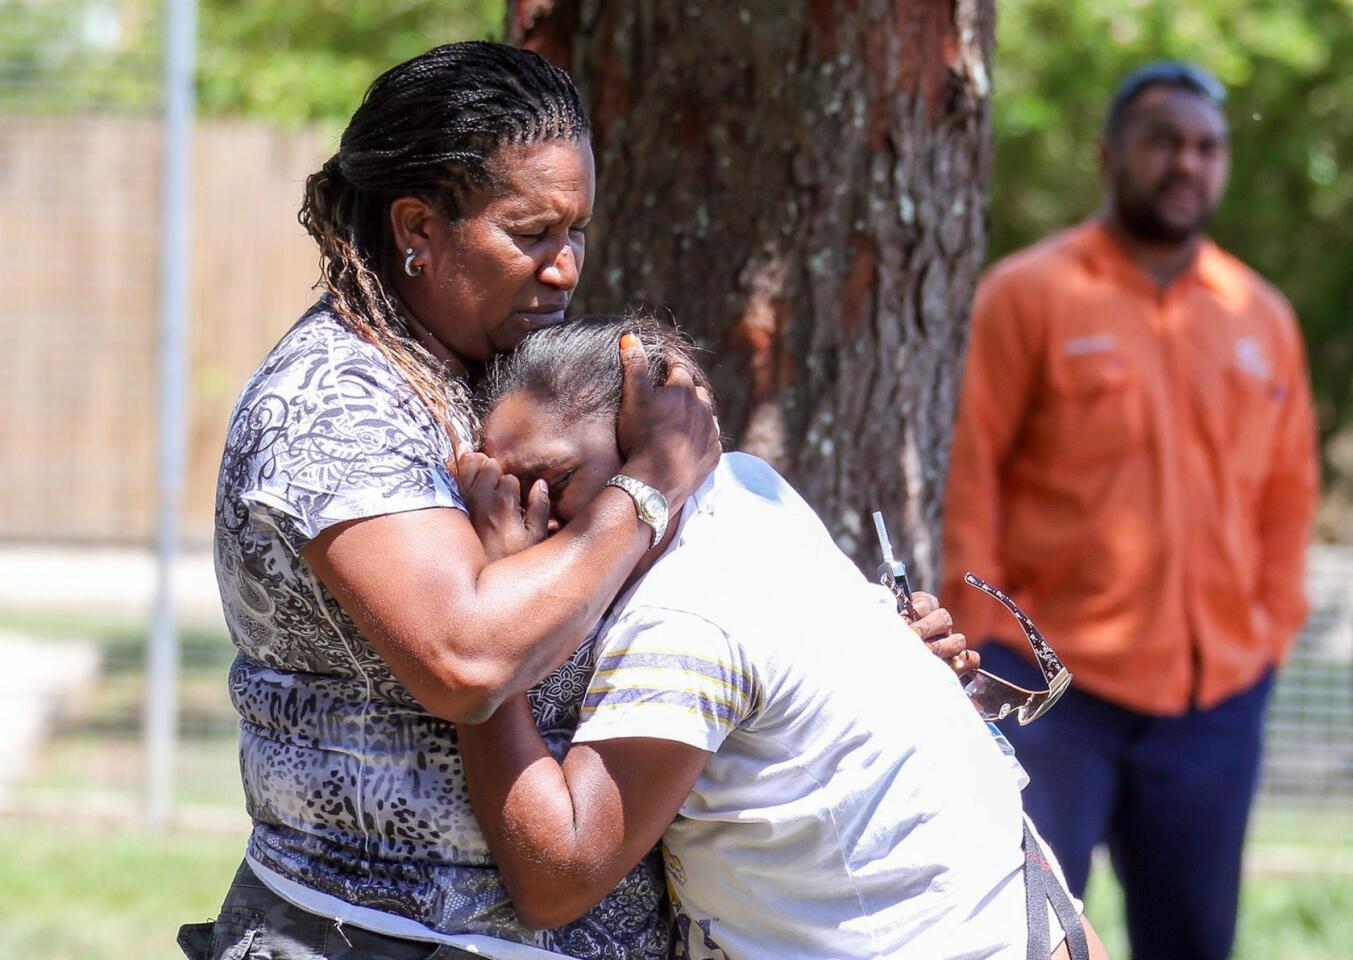 People believed to be relatives and friends of the victims grieve at the scene in Manoora, Australia.